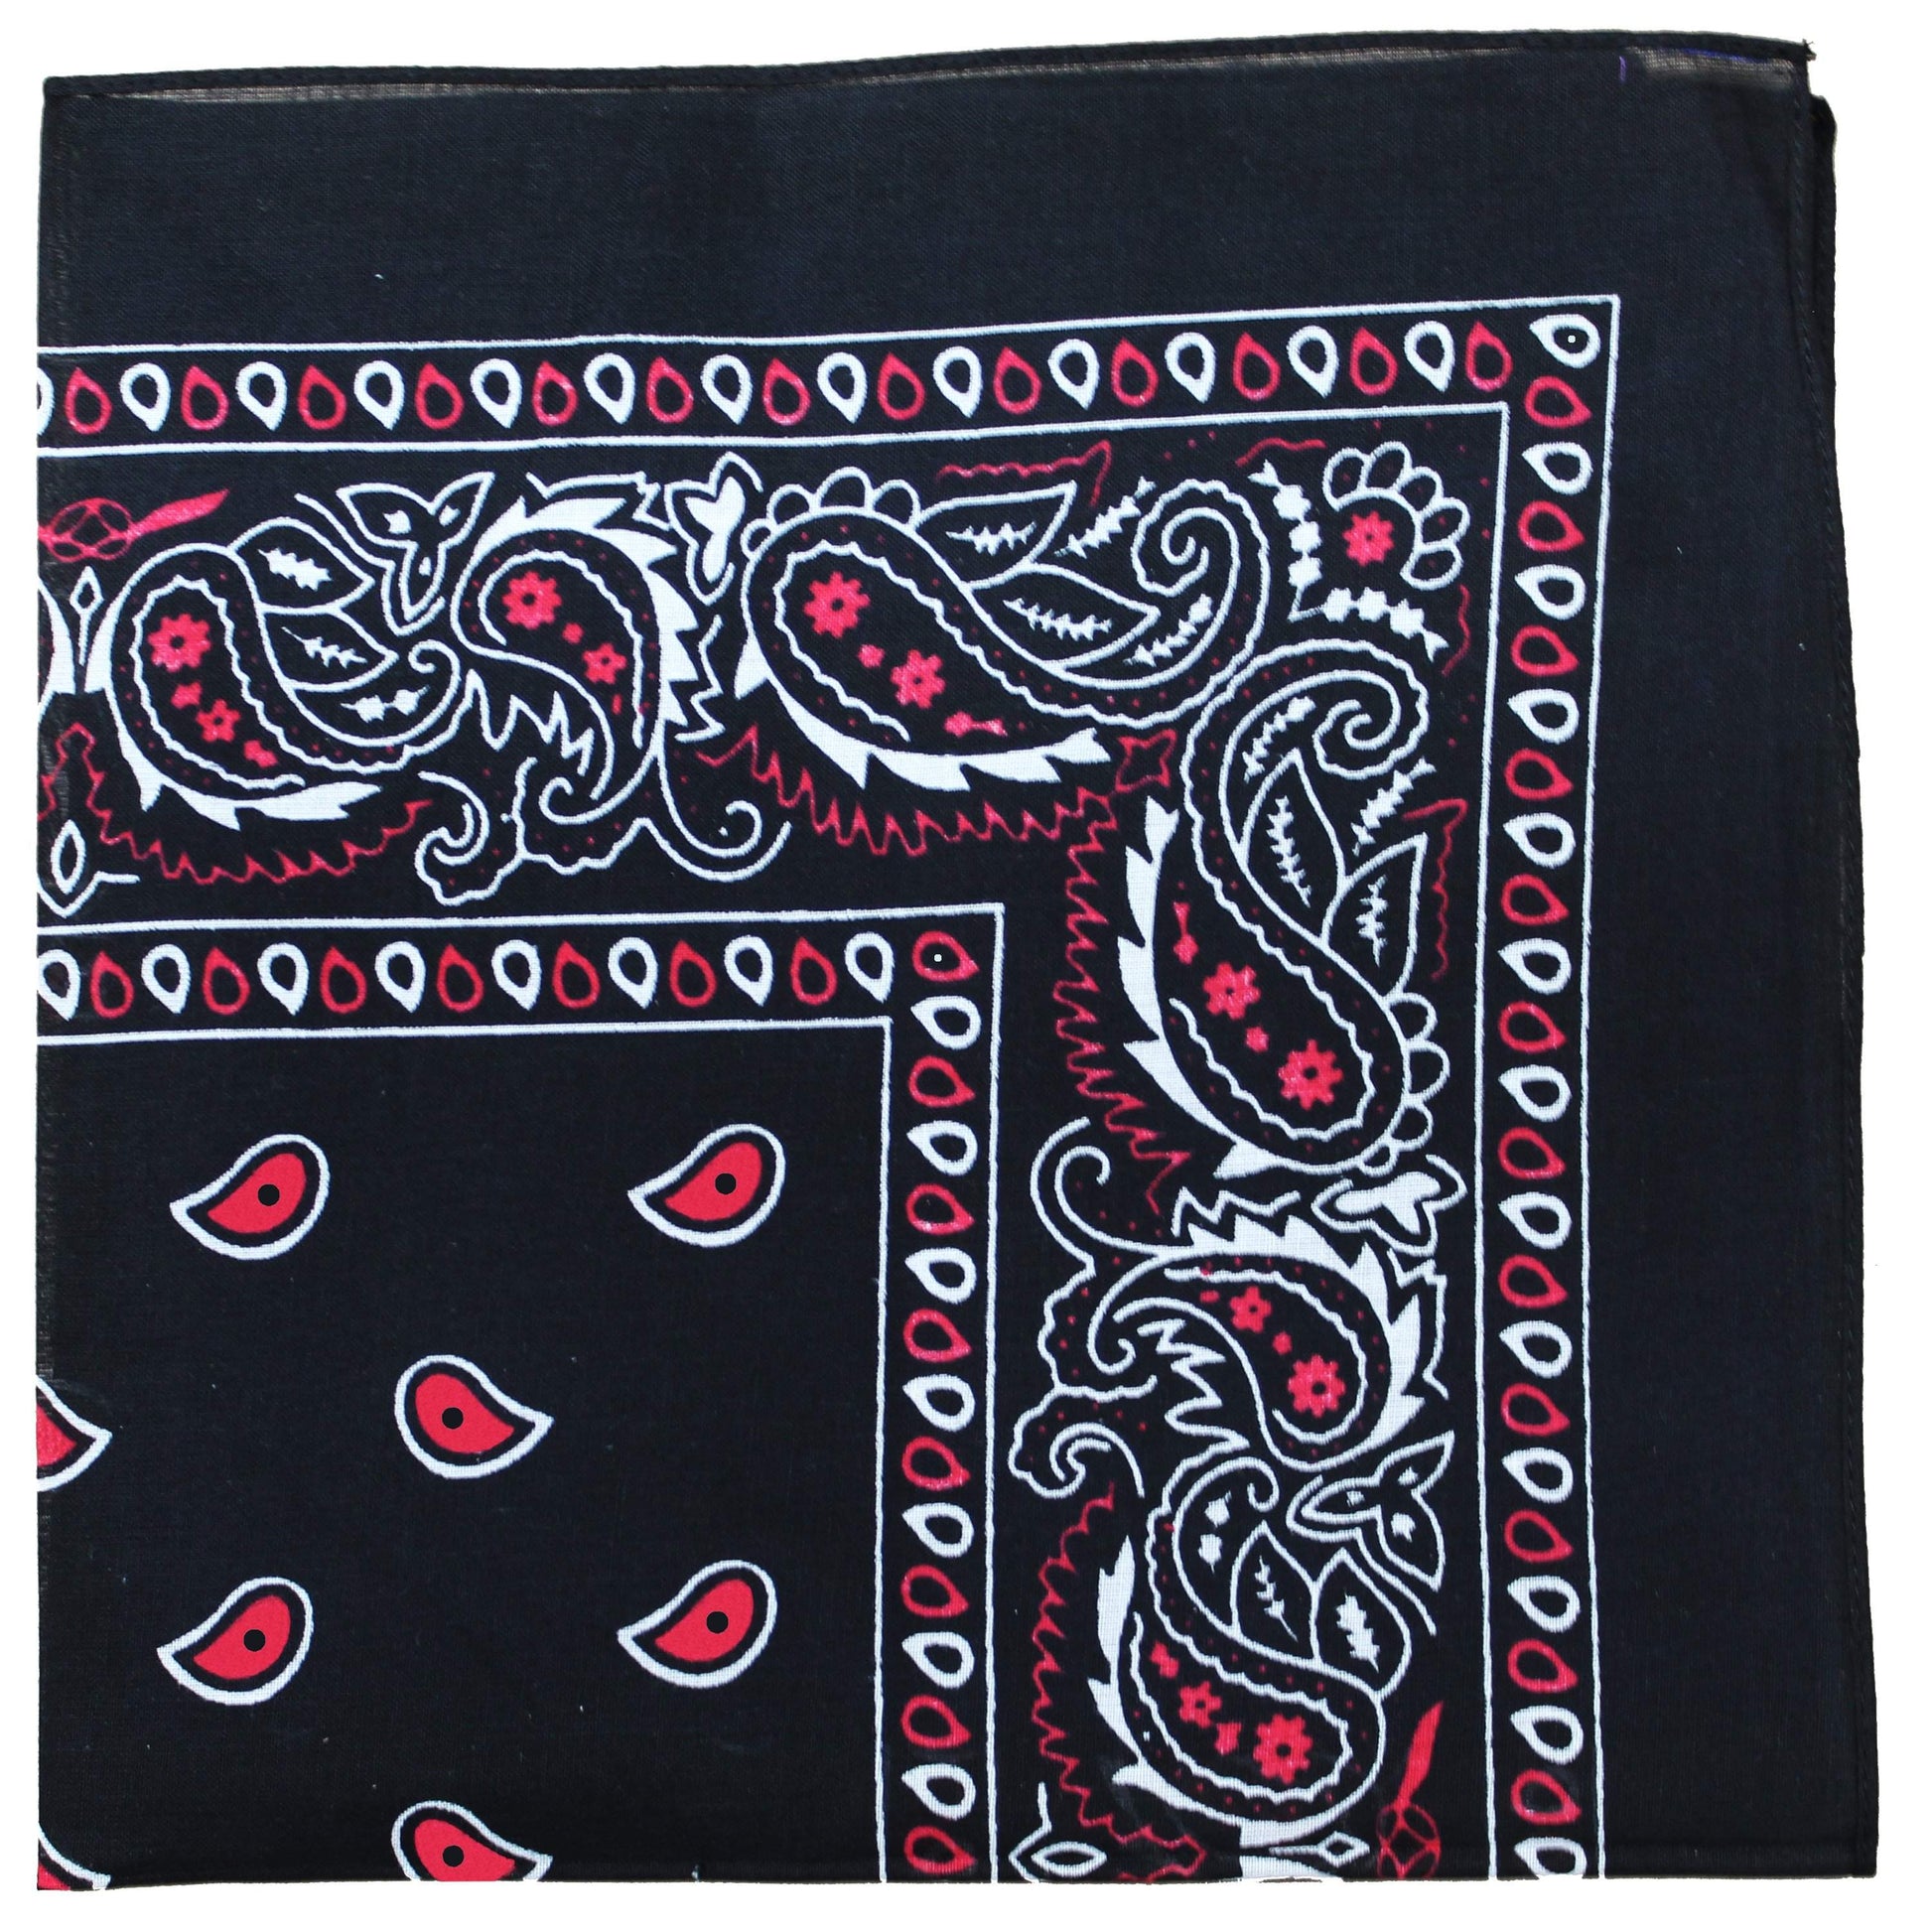 Mechaly Paisley 100% Cotton Double Sided Bandanas - 24 Pack